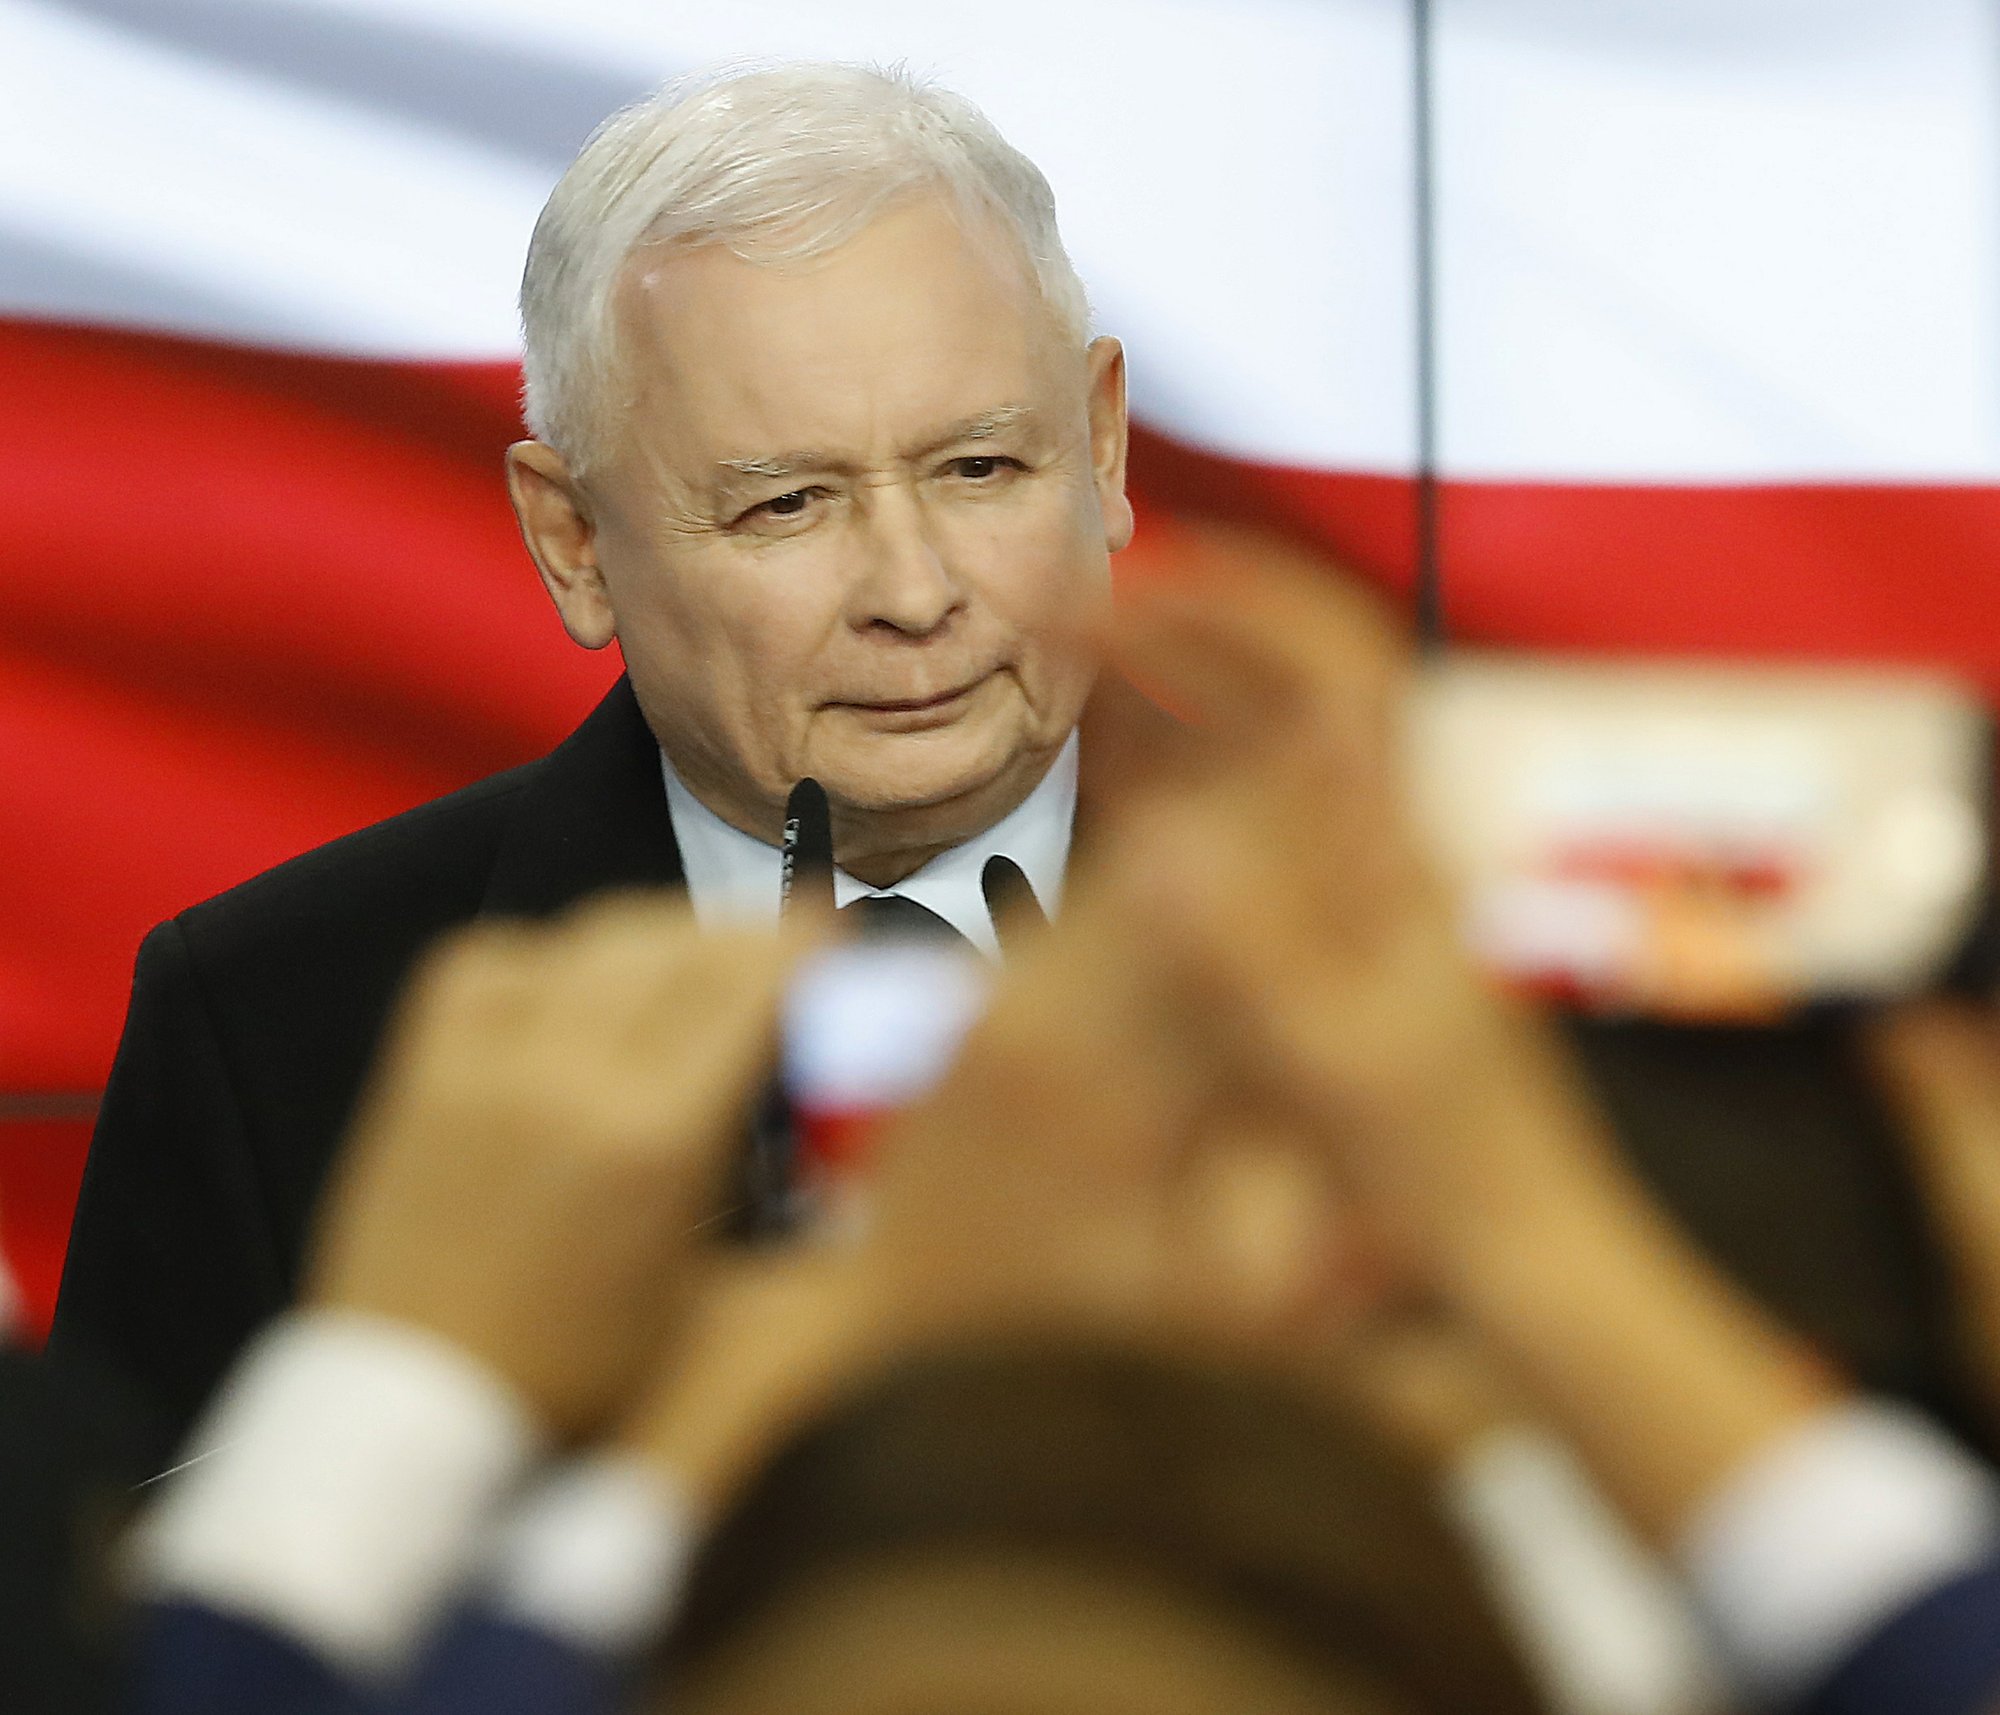 Poland S Right Wing Wins But Leader Kaczynski Wants More